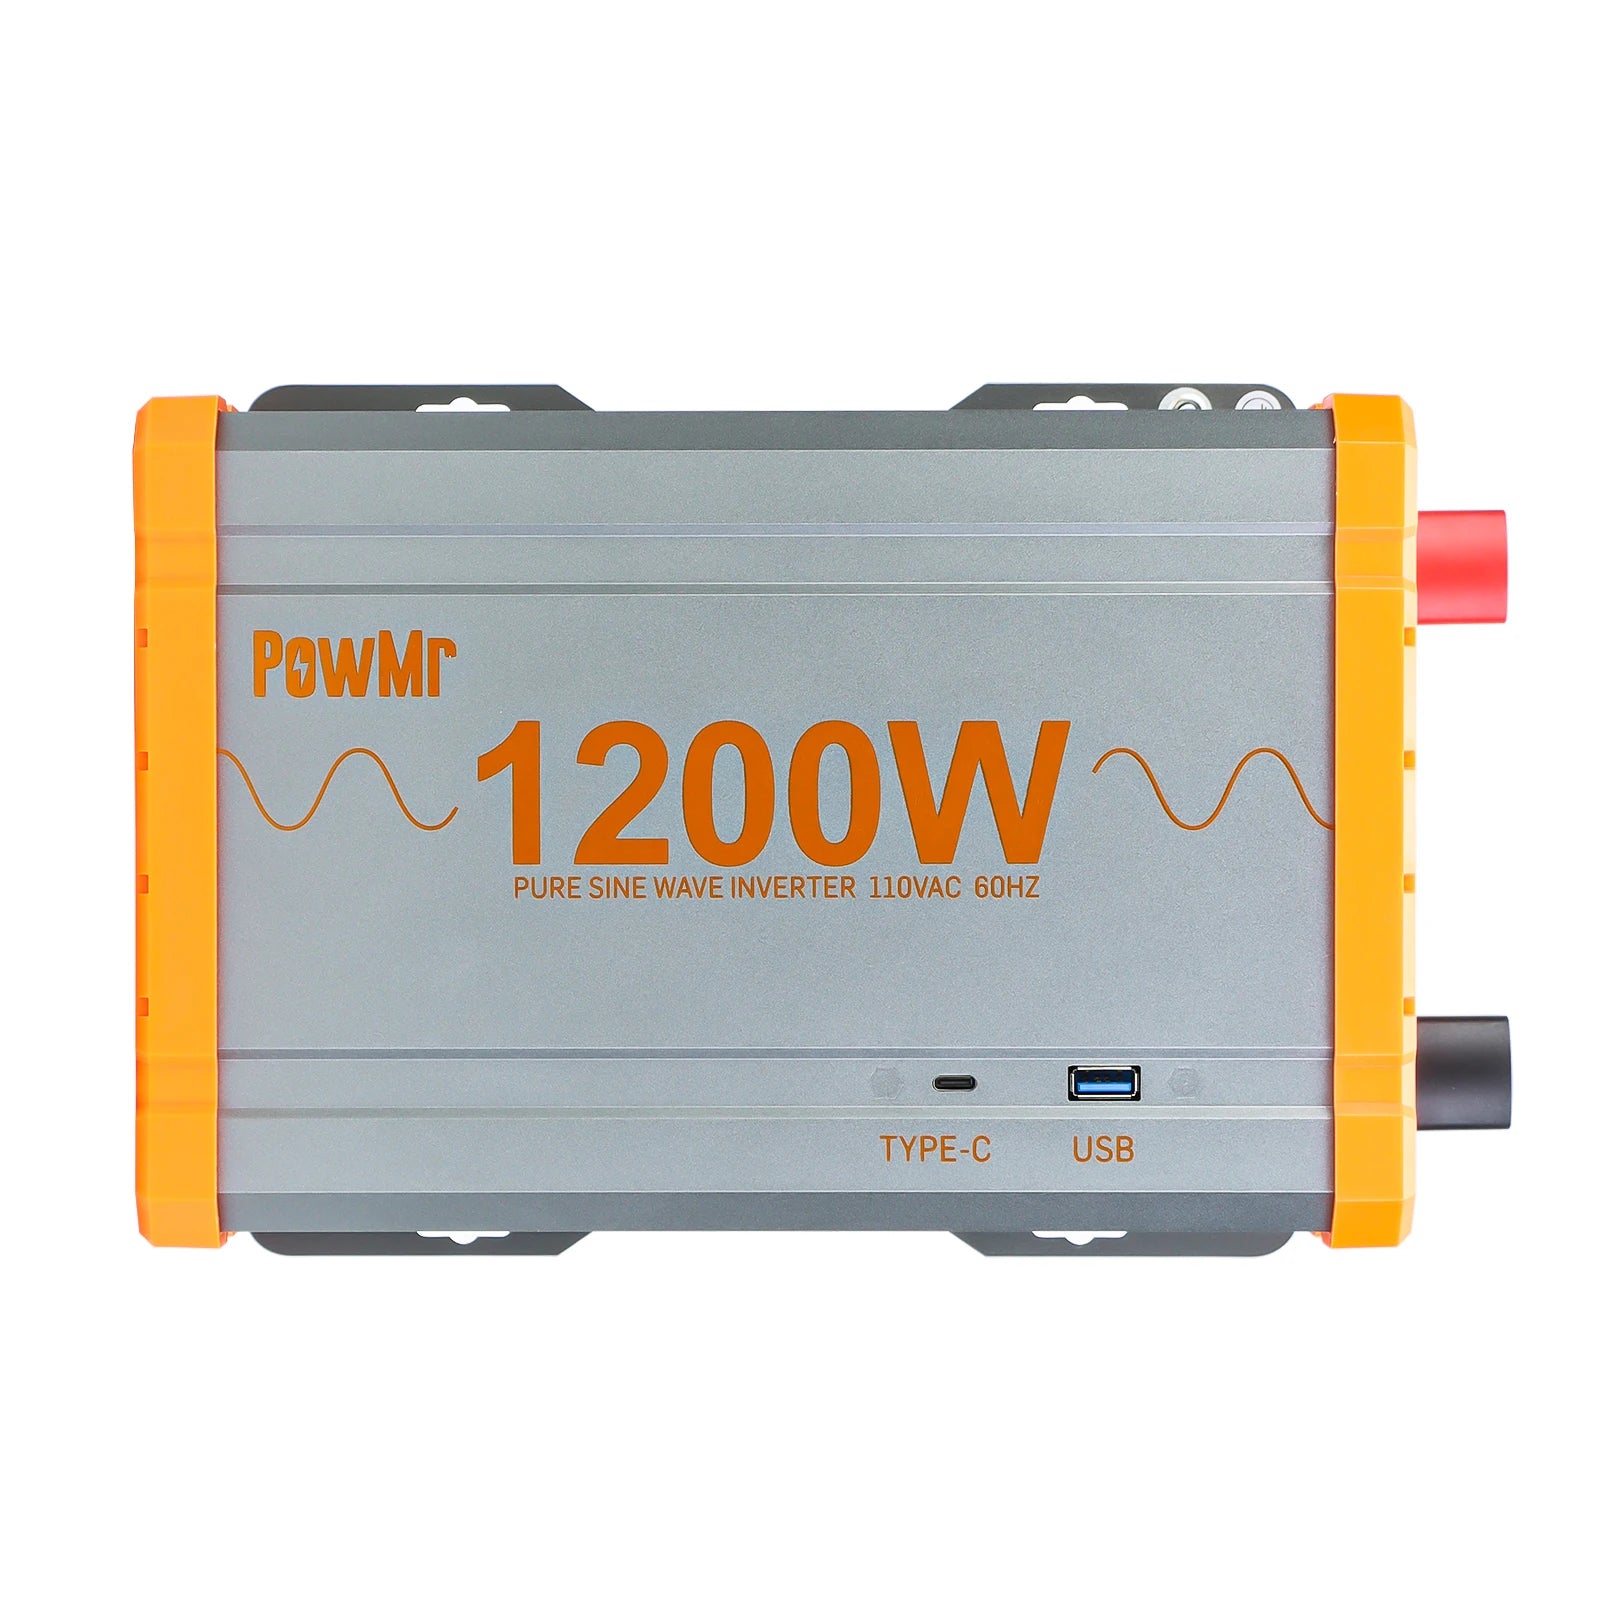 1200W 2000W Pure Sine Wave Solar Inverter, Powerful inverter with pure sine wave, Type-C port, and dual AC outlets for versatile charging on-the-go.